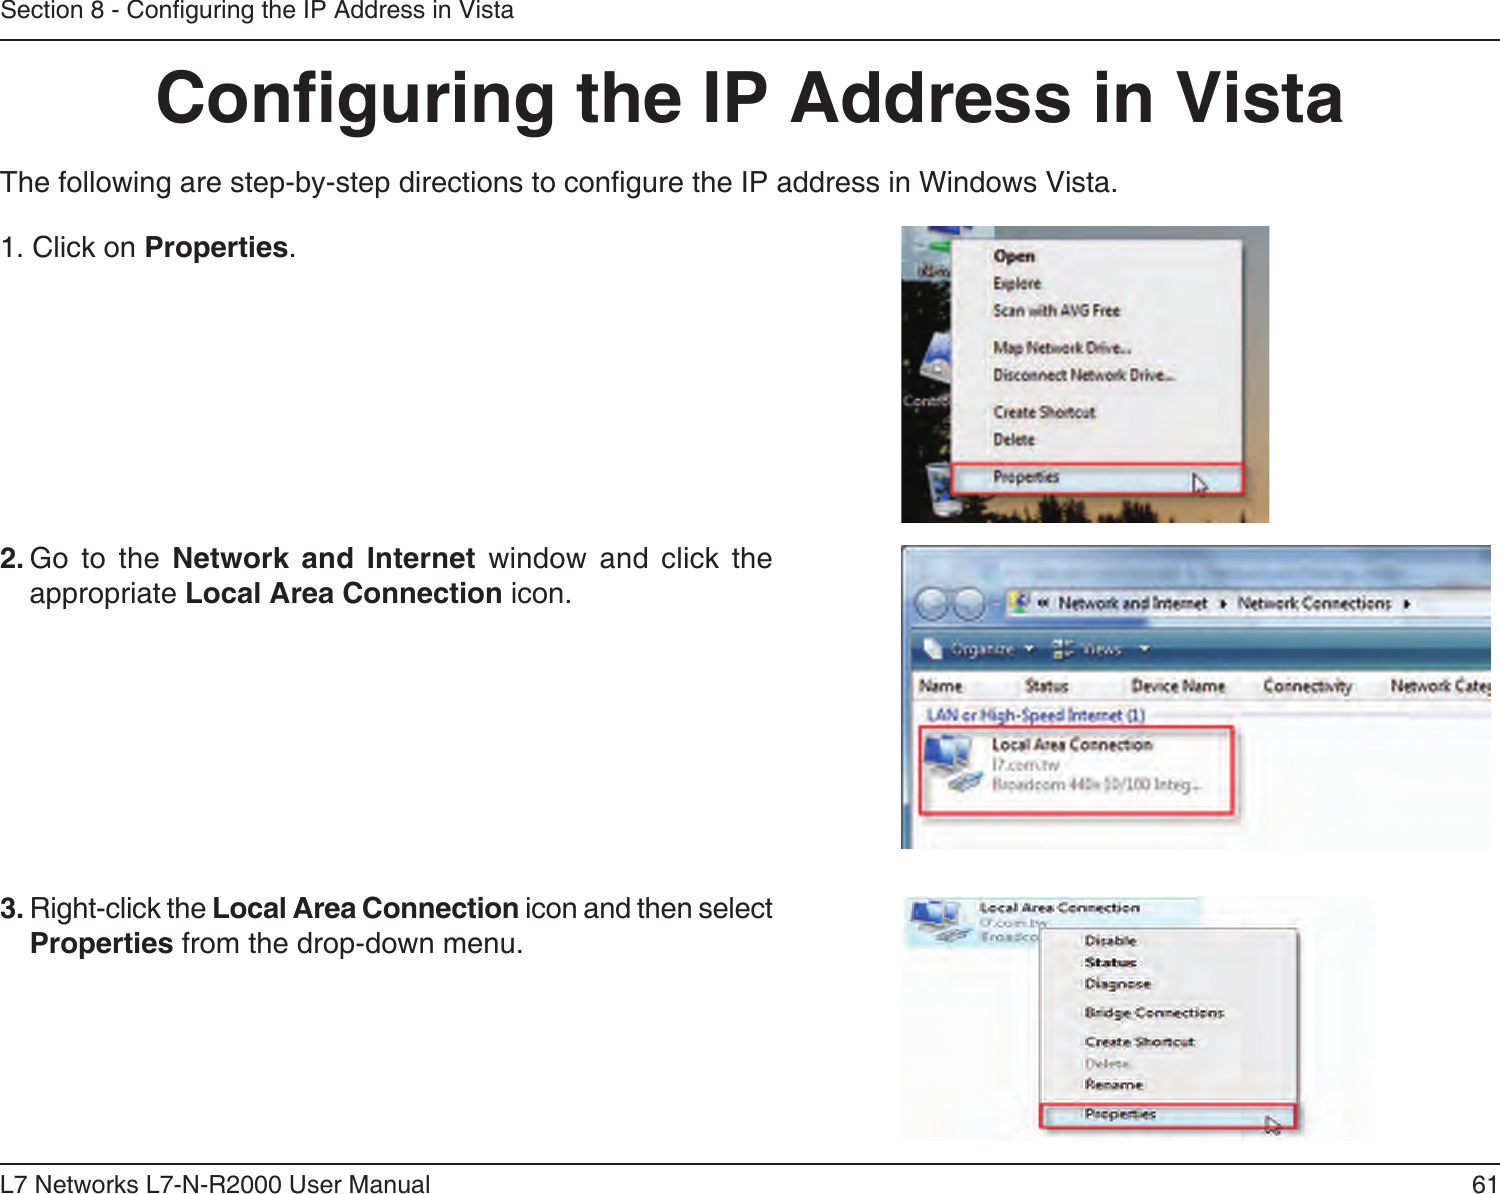 61L7 Networks L7-N-R2000 User ManualSection 8 - Conguring the IP Address in VistaConguring the IP Address in VistaThe following are step-by-step directions to congure the IP address in Windows Vista.    2. Go  to  the  Network  and  Internet  window  and  click  the appropriate Local Area Connection icon. 1. Click on Properties.     3. Right-click the Local Area Connection icon and then select Properties from the drop-down menu. 